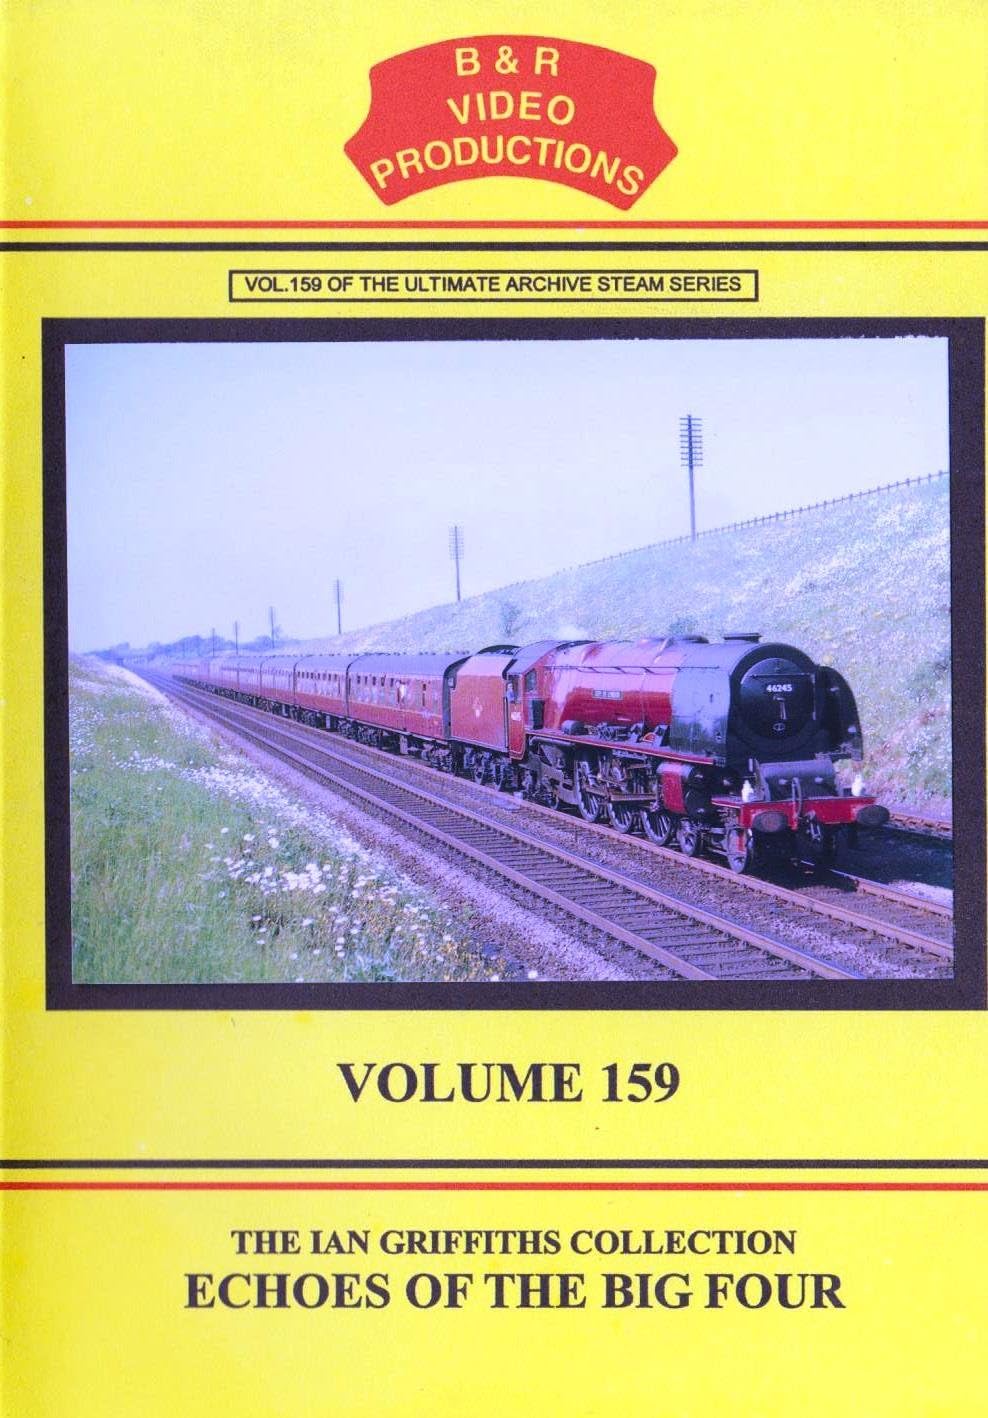 B & R Video Productions Vol 159 - The Ian Griffiths collection Echoes of the big four 